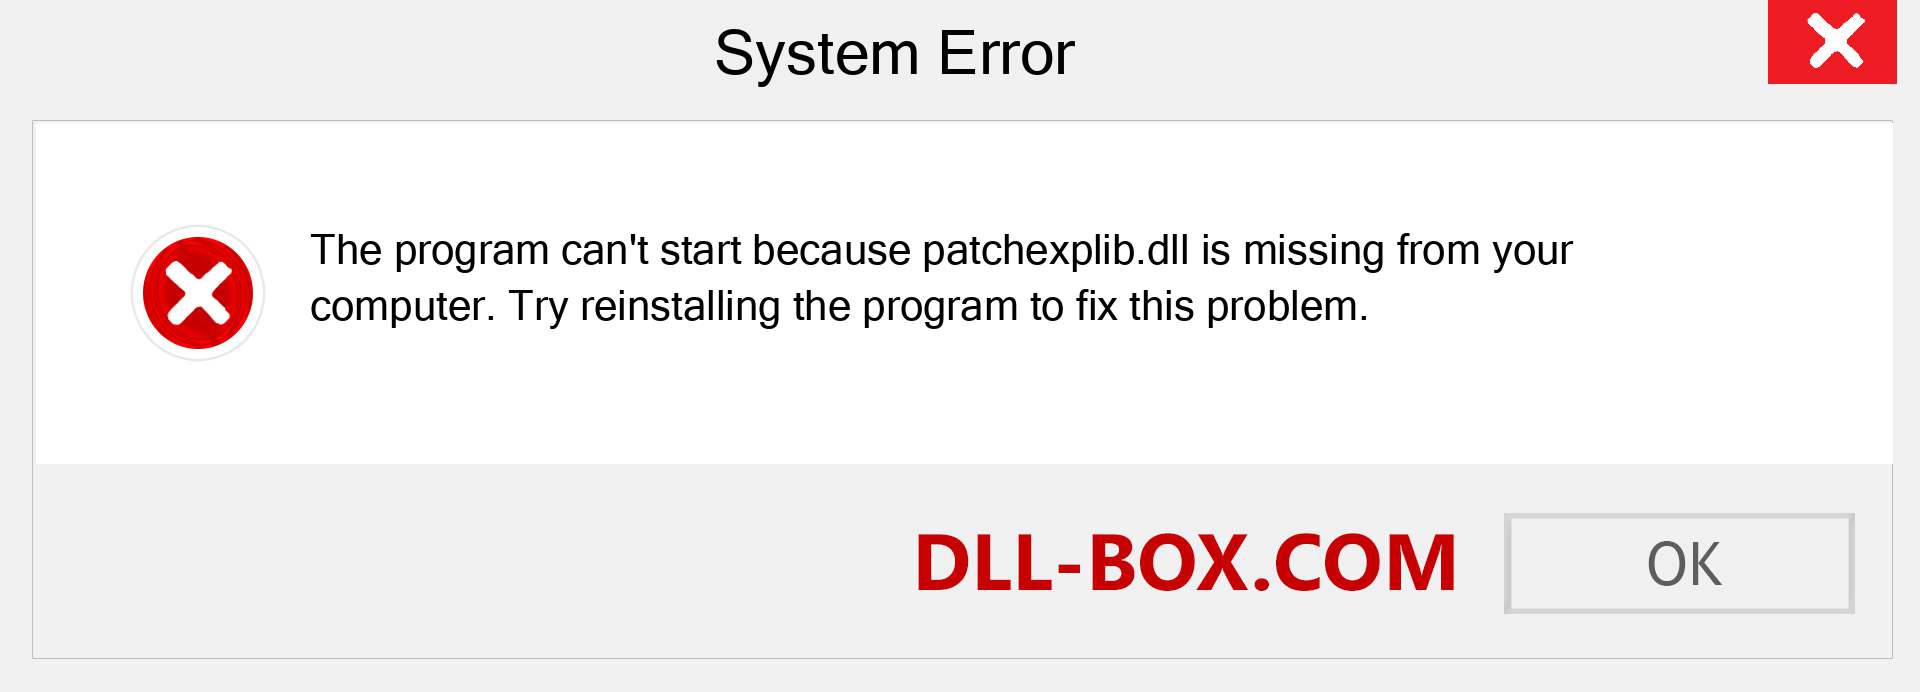  patchexplib.dll file is missing?. Download for Windows 7, 8, 10 - Fix  patchexplib dll Missing Error on Windows, photos, images